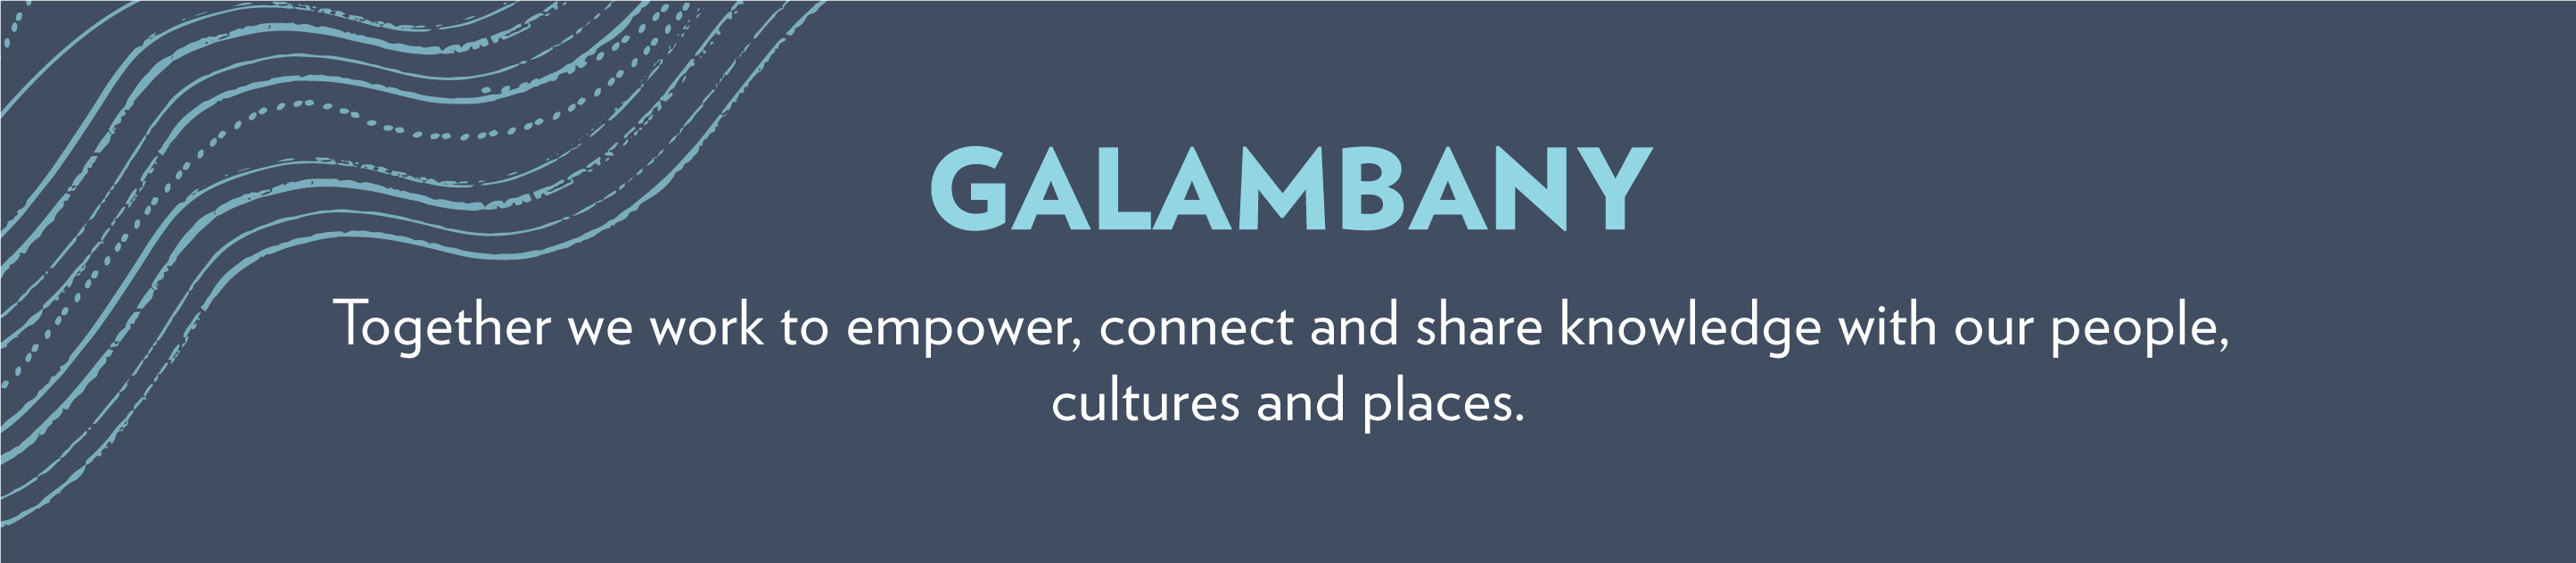 Galambany: Together we work to empower, connect and share knowledge with our people, cultures and places